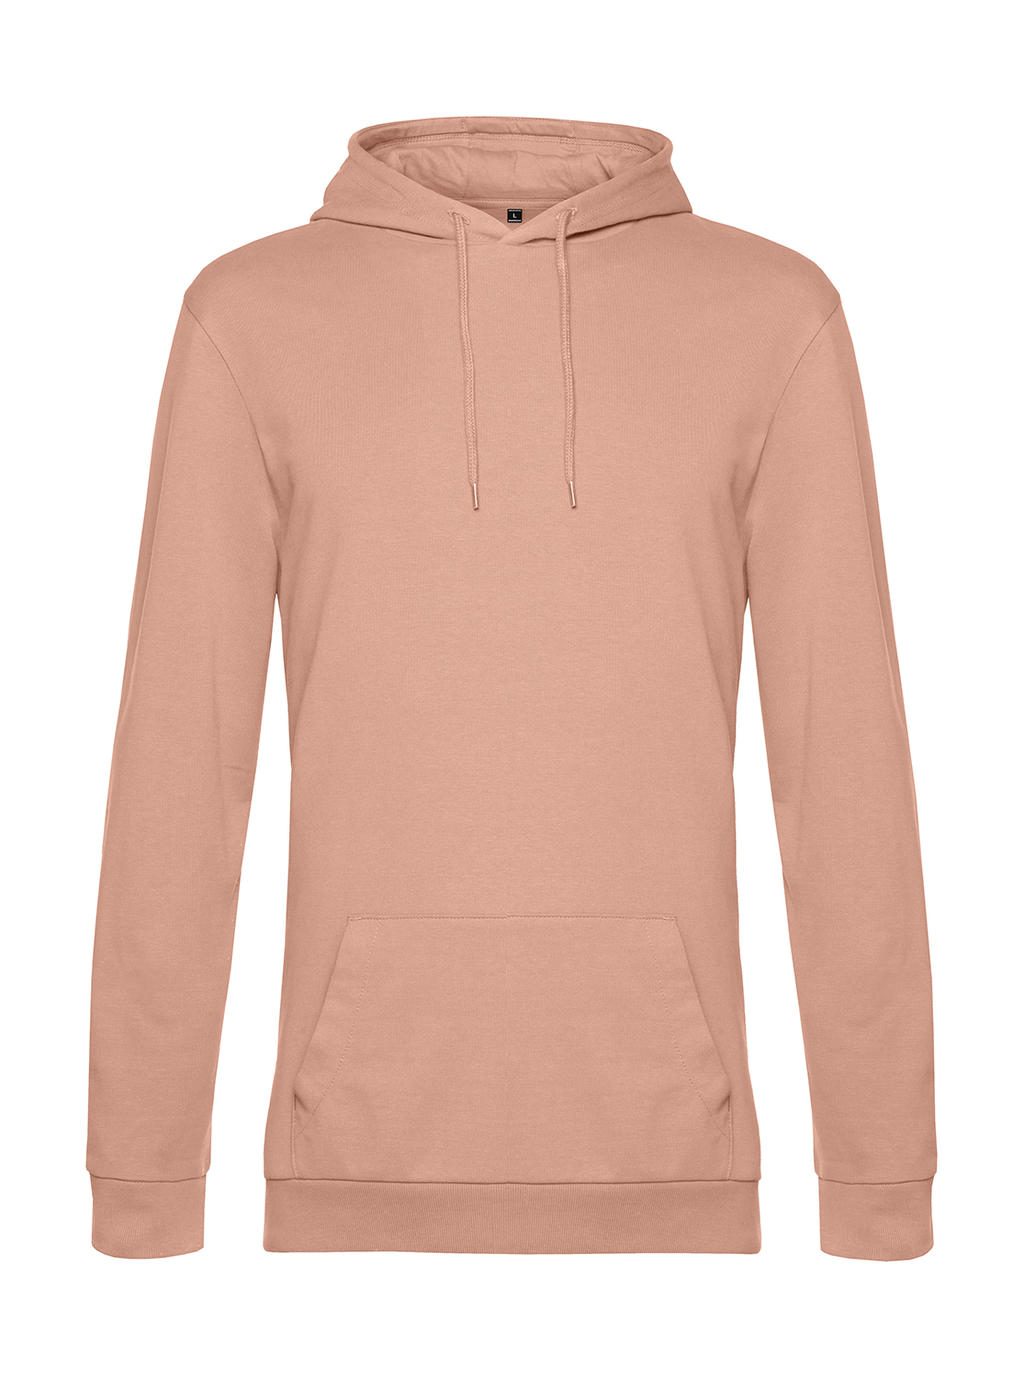  #Hoodie French Terry in Farbe Nude